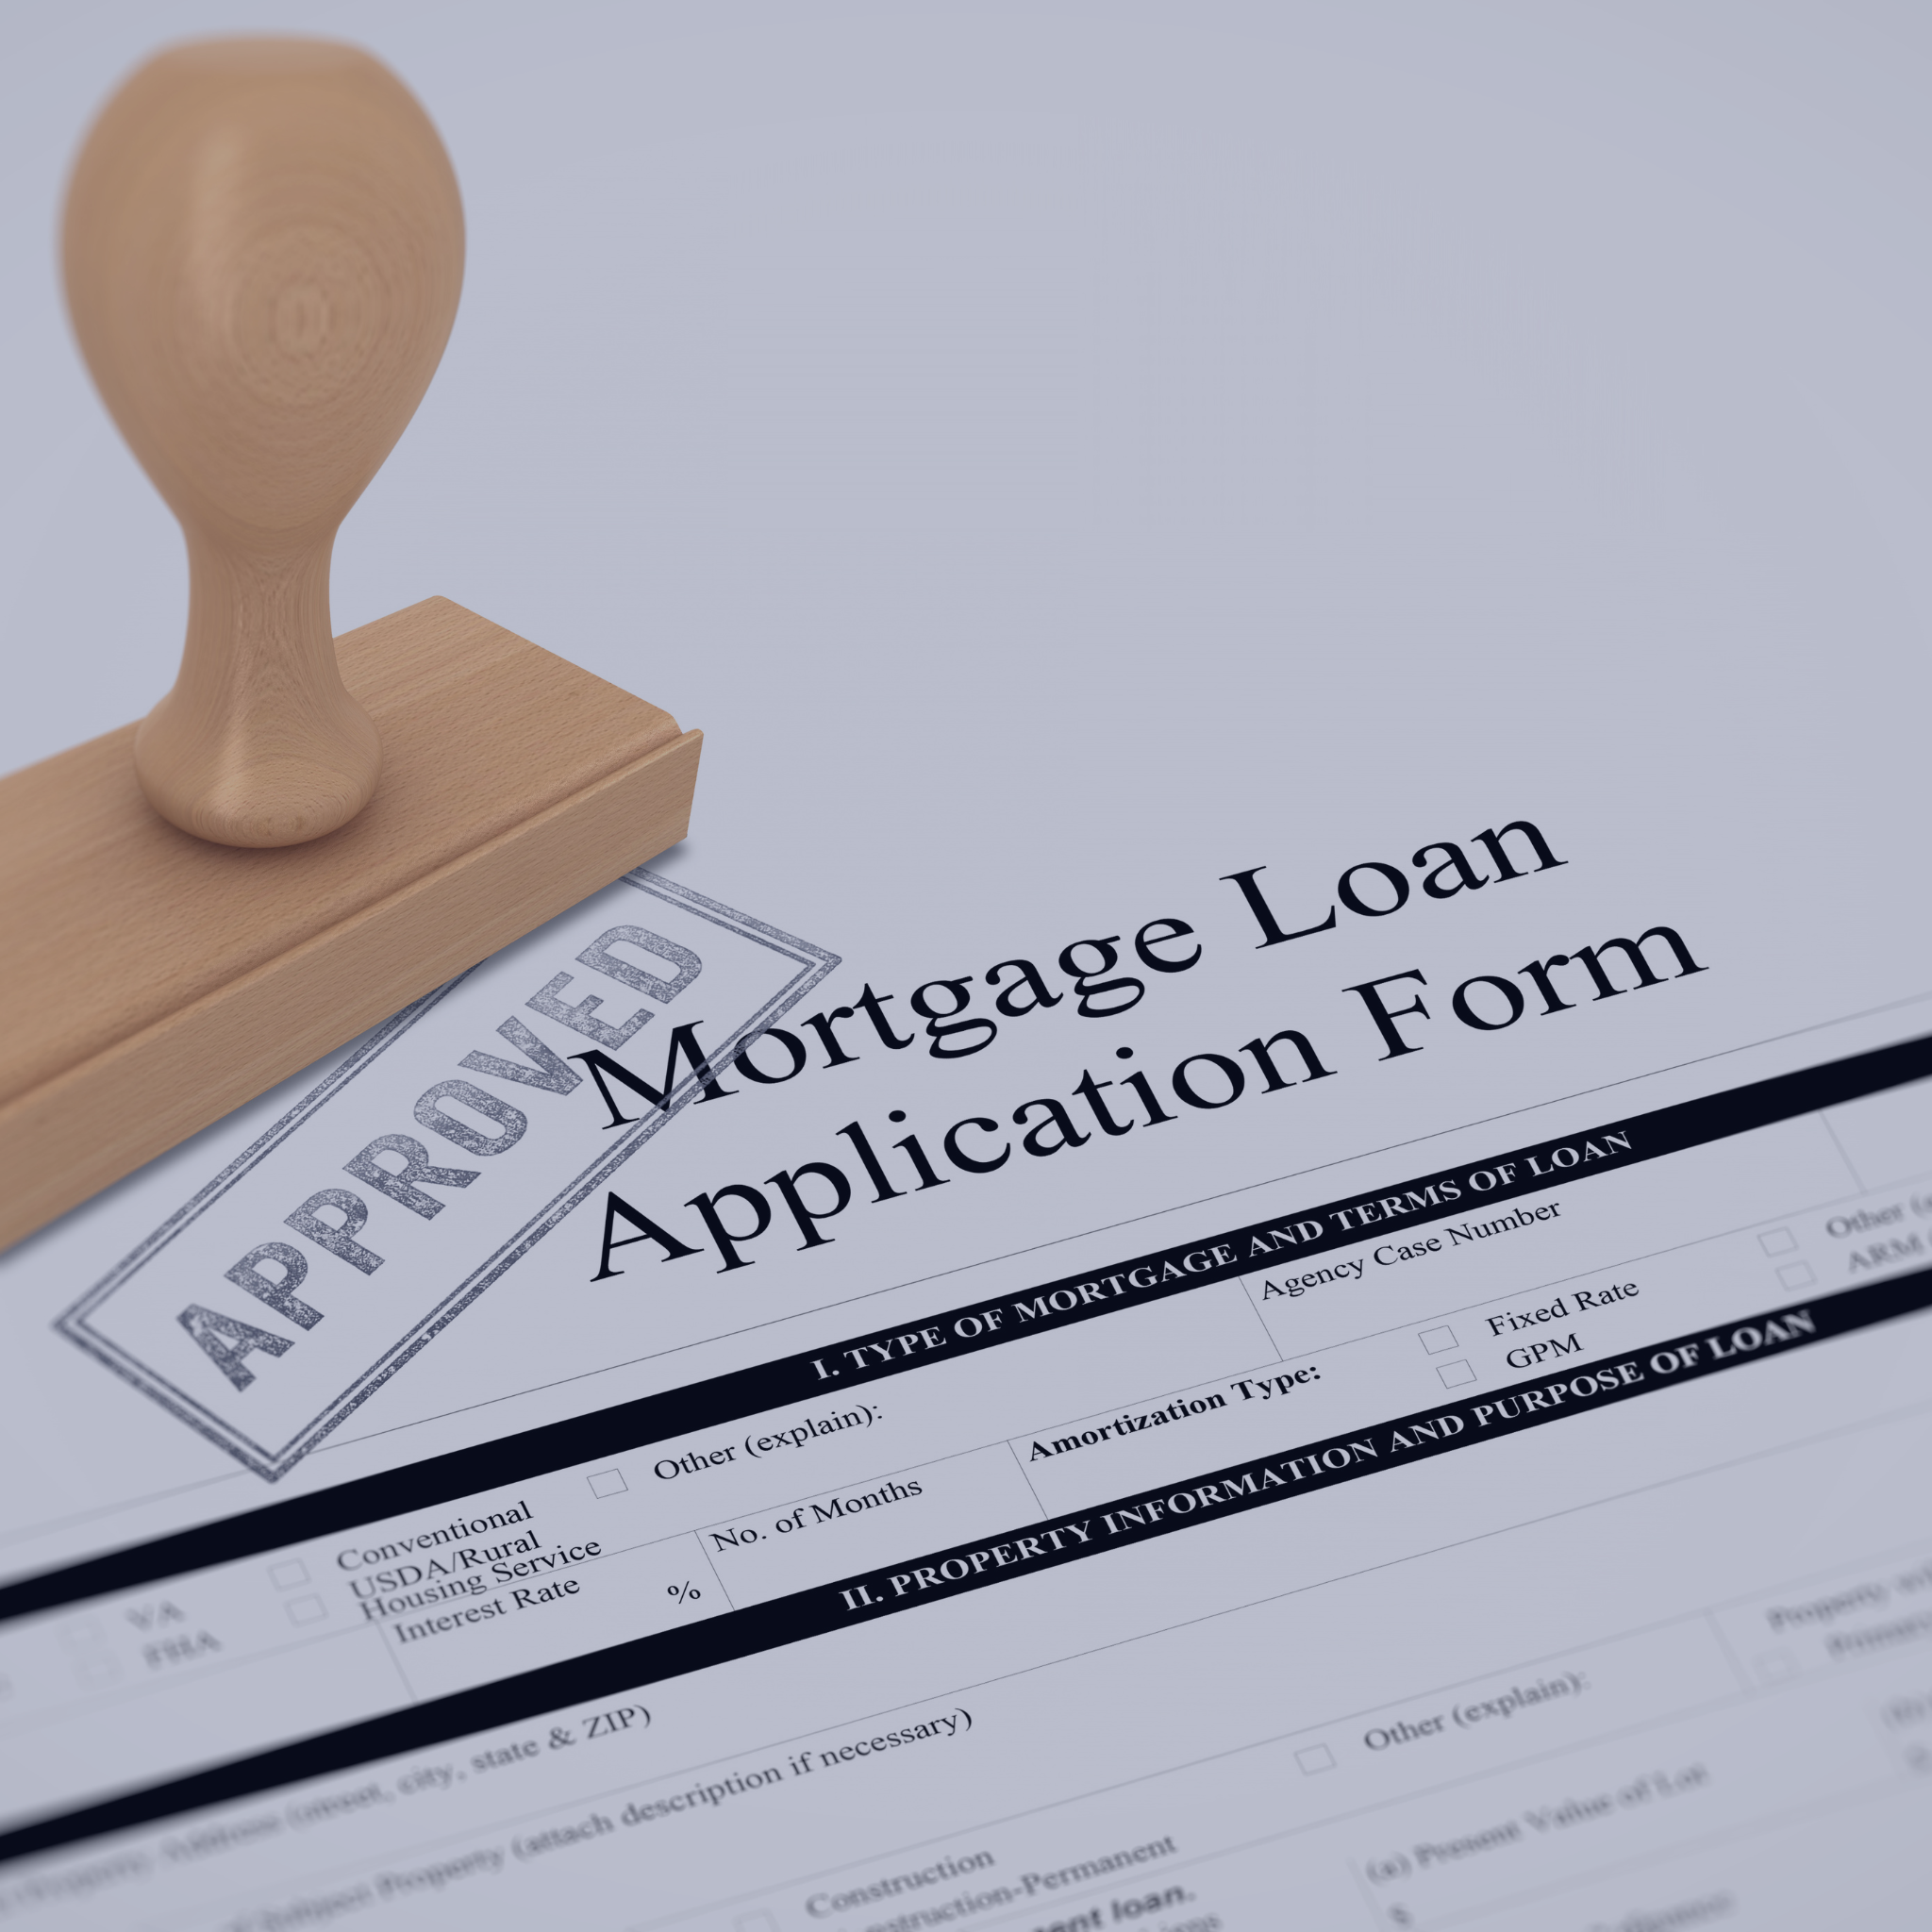 We conduct a formal closing and you get a mortgage on the property.